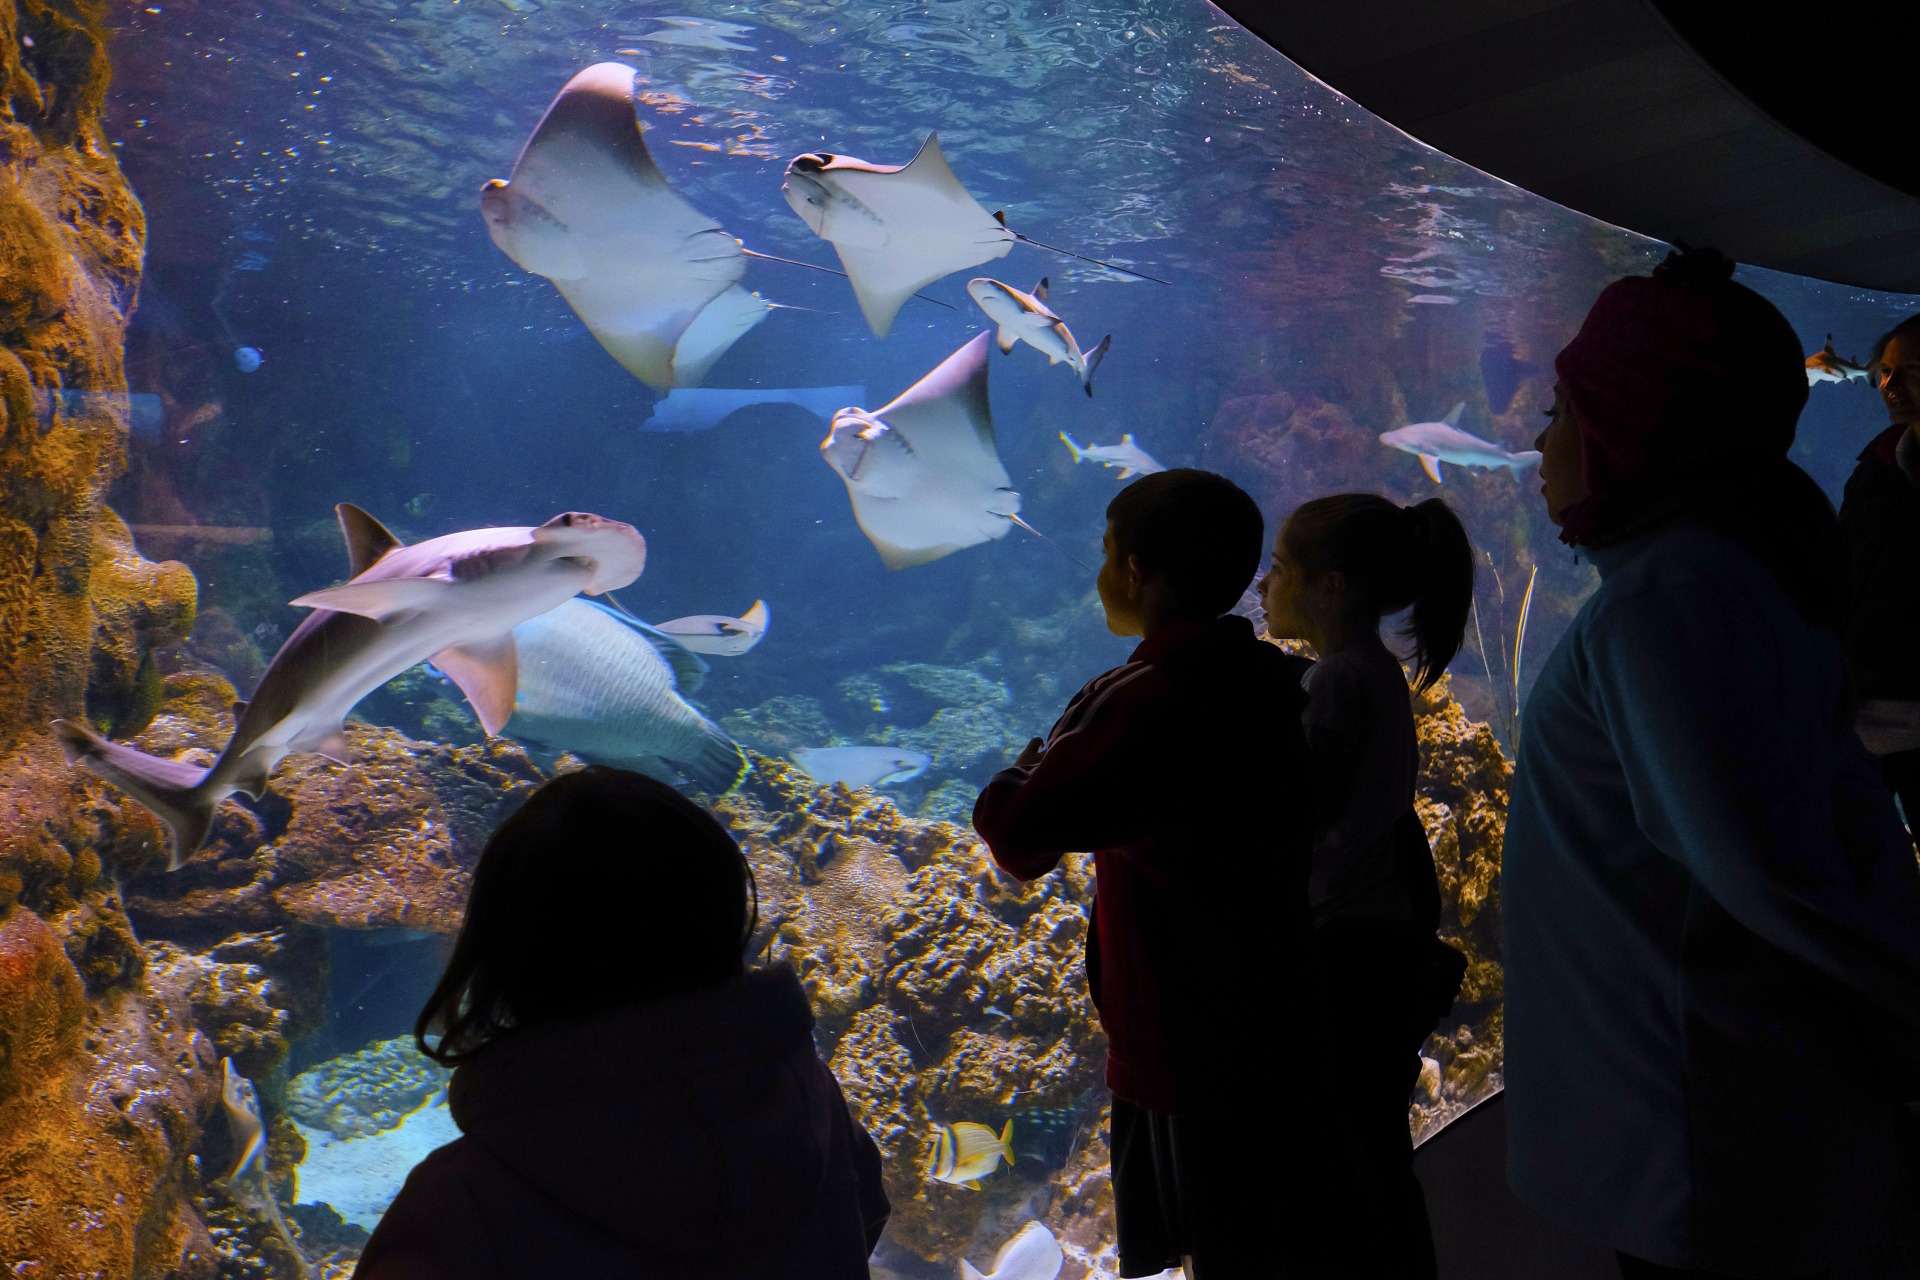 Kids looking through the glass at sharks and fish in the aquarium